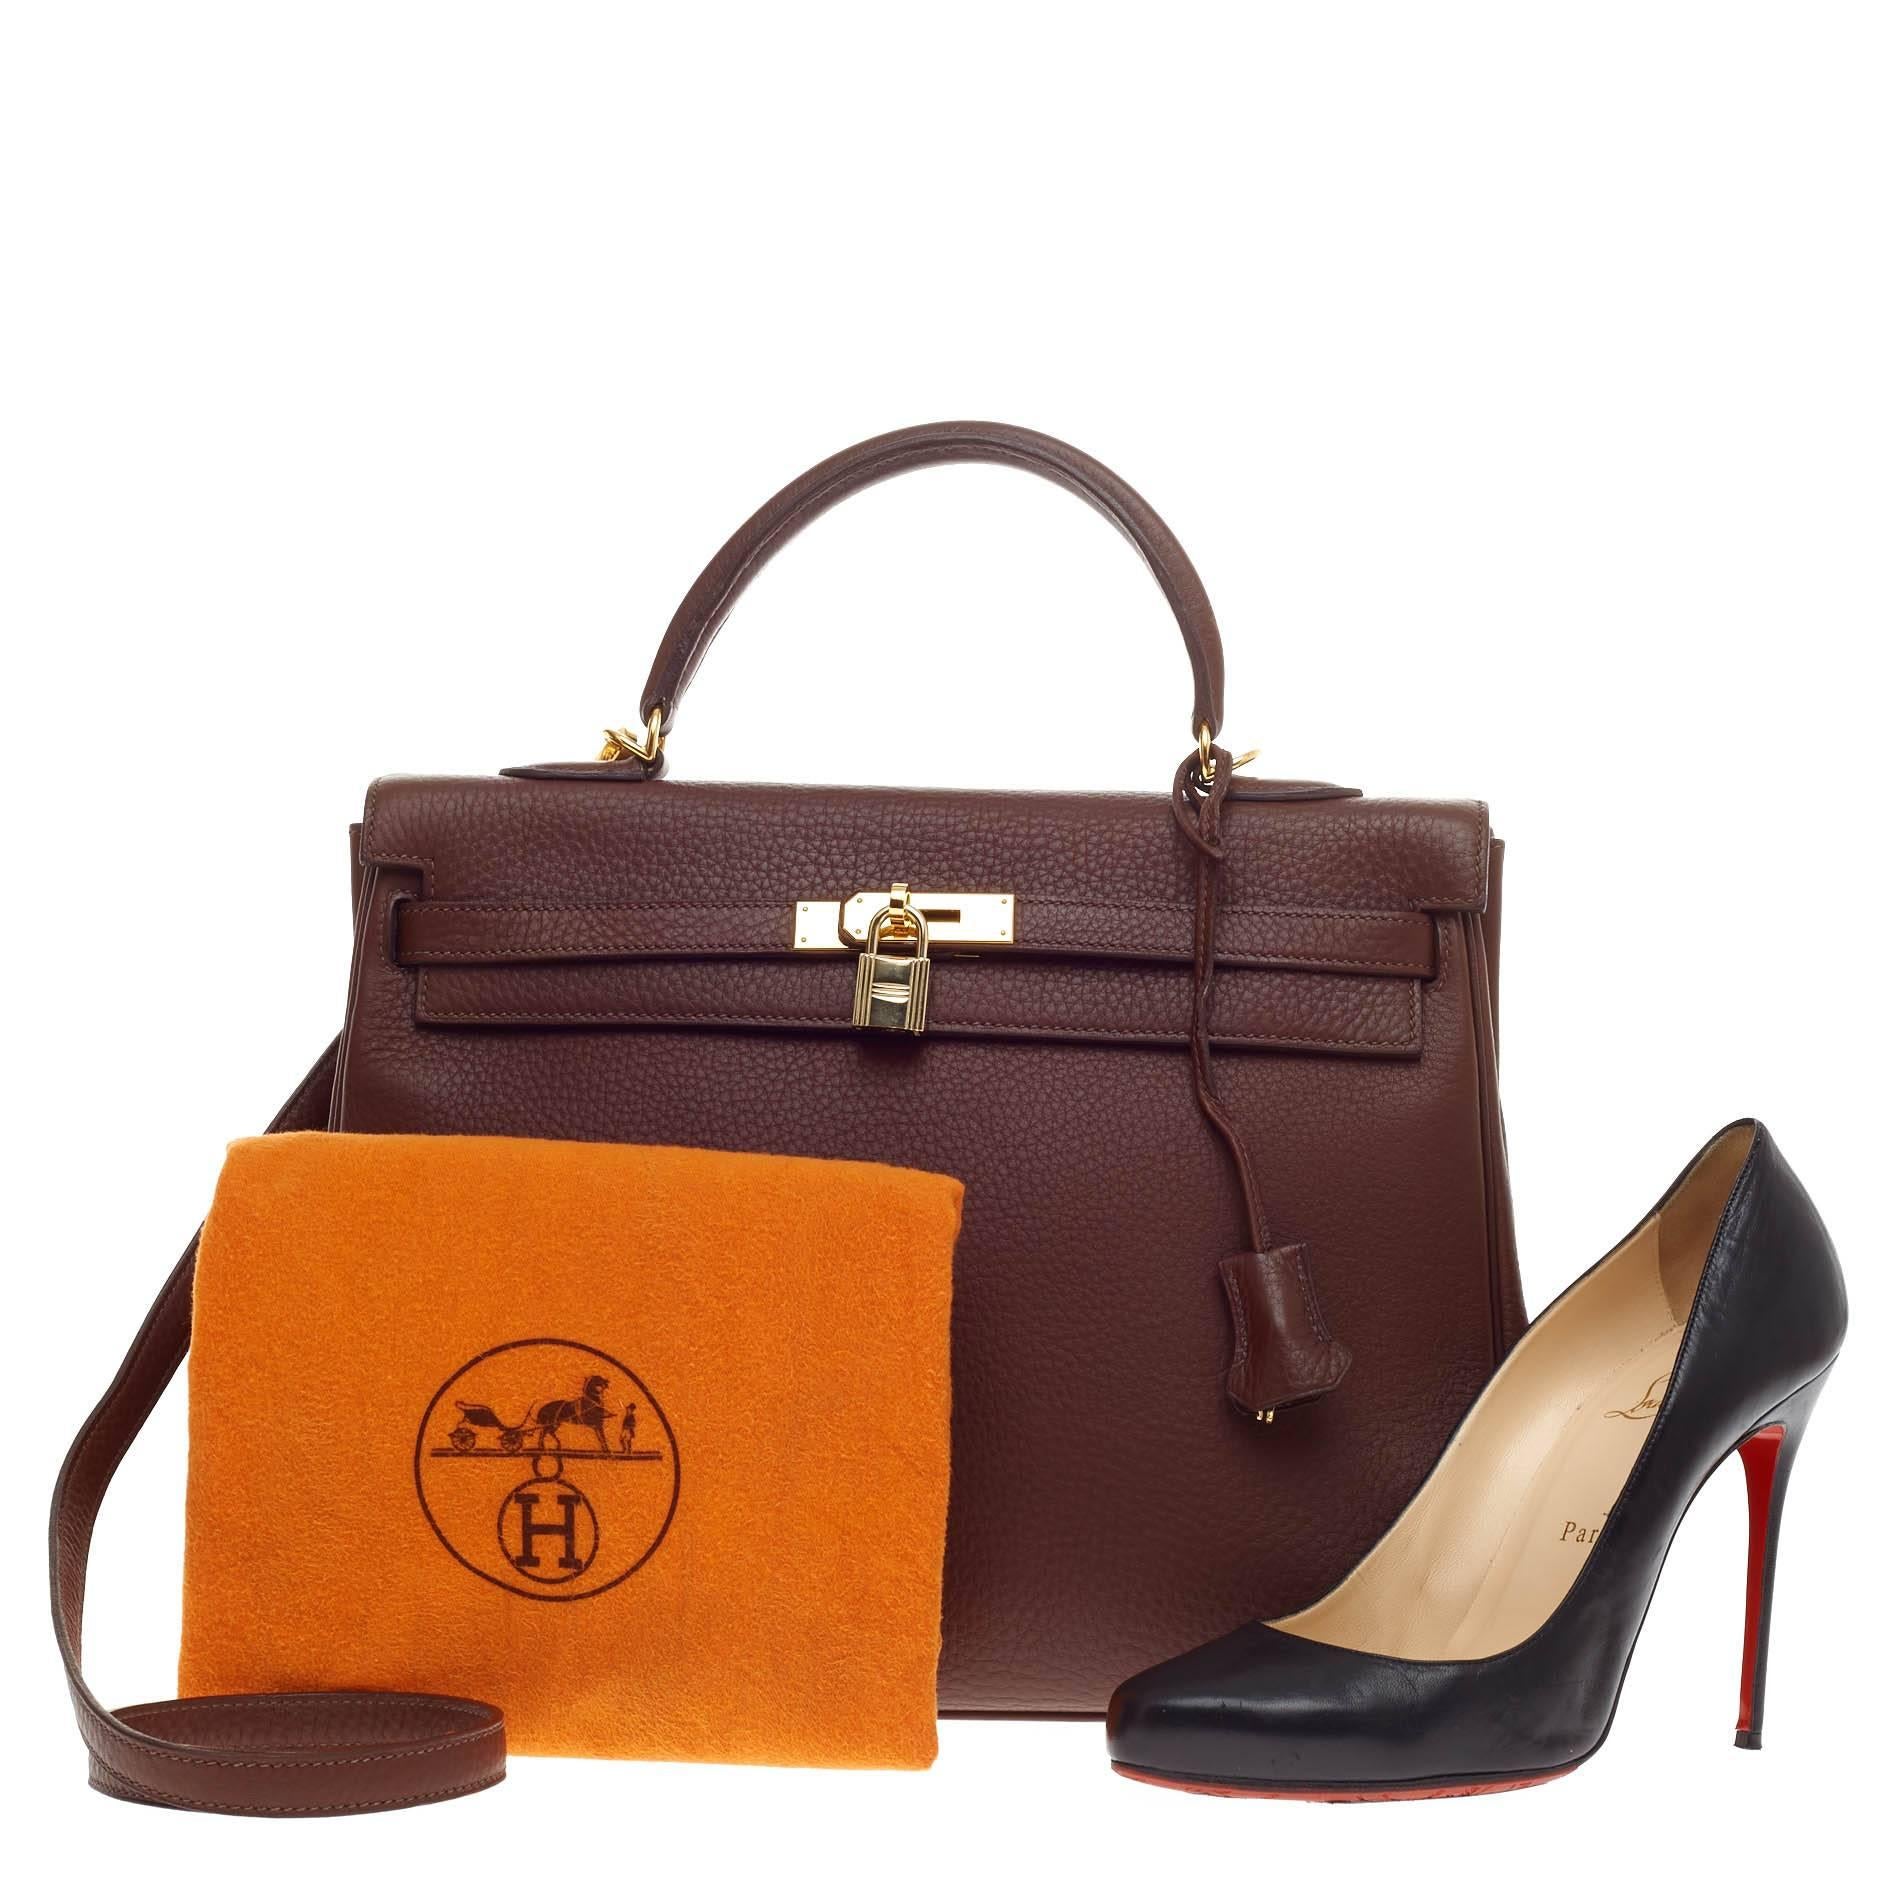 This authentic Hermes Kelly Chocolate Clemence with Gold Hardware 35 is as classic and timeless as they come. Designed in scratch-resistant, chocolate brown clemence leather and accented with polished gold hardware, this timeless satchel features a